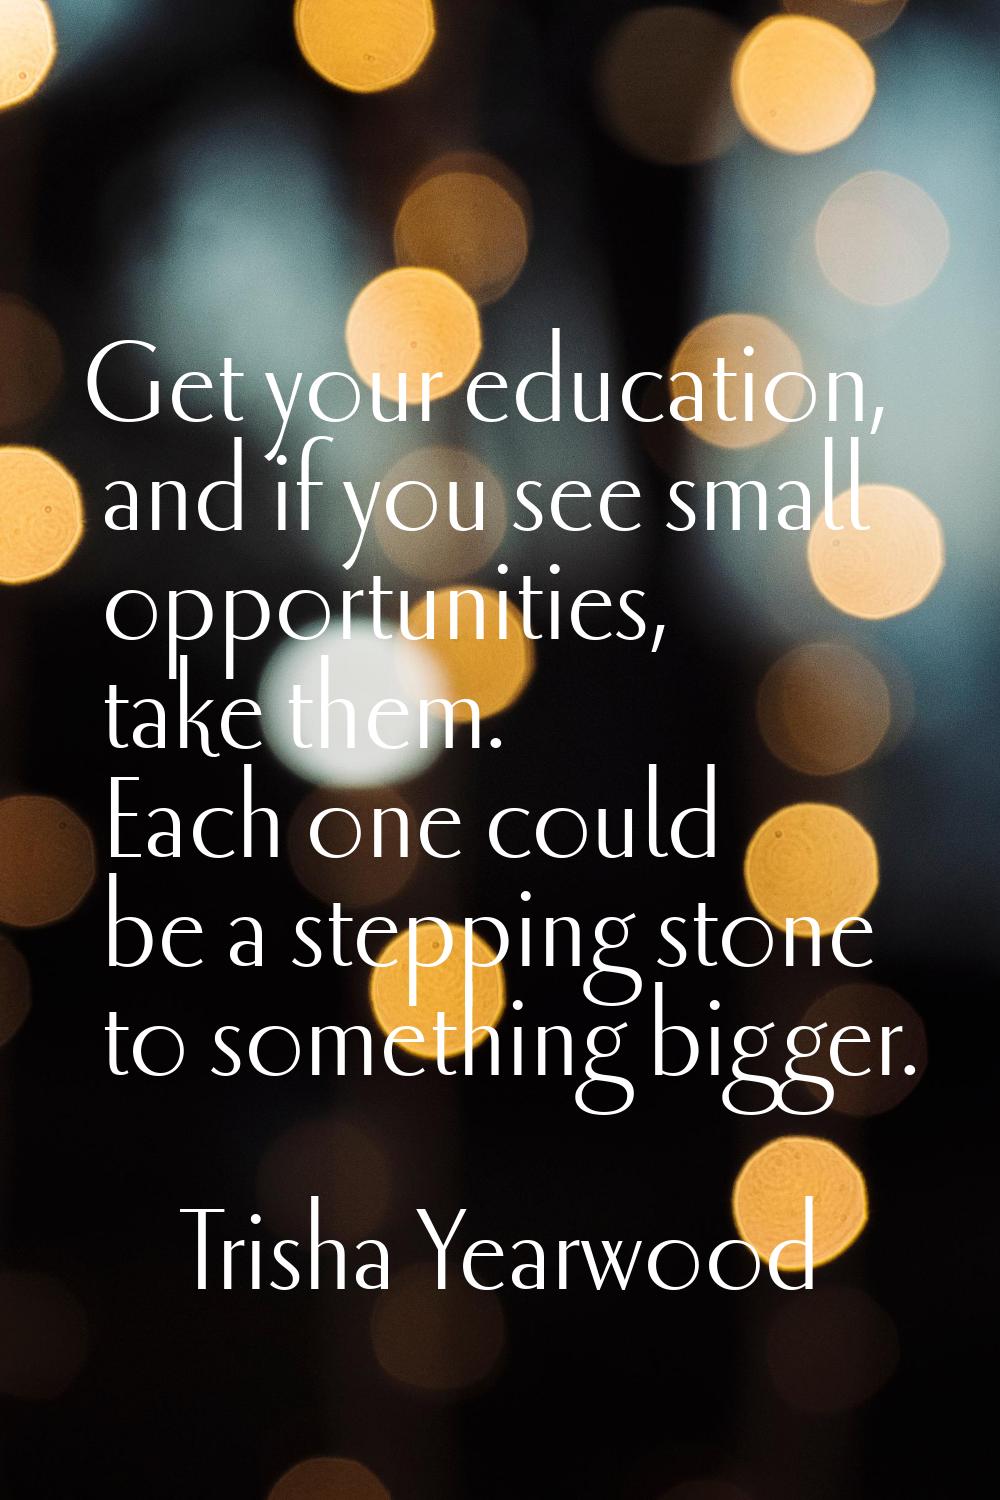 Get your education, and if you see small opportunities, take them. Each one could be a stepping sto